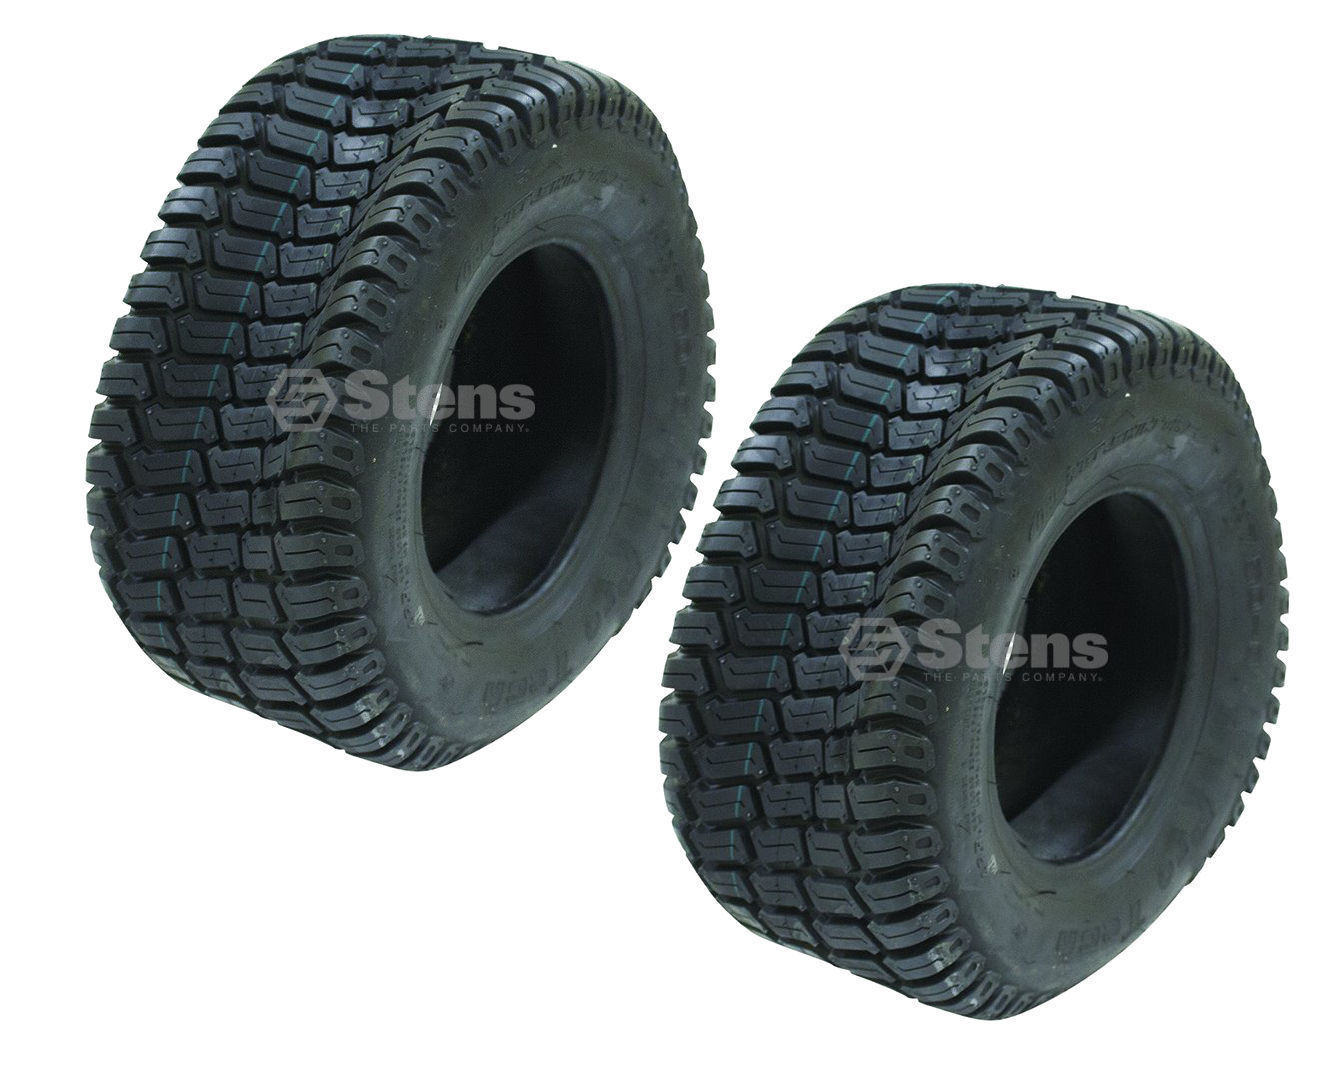 160-208 Stens Set of 2 CST Turf Tires 16x7.5-8 Pro Tech Tread Tubeless 4 Ply - $137.97